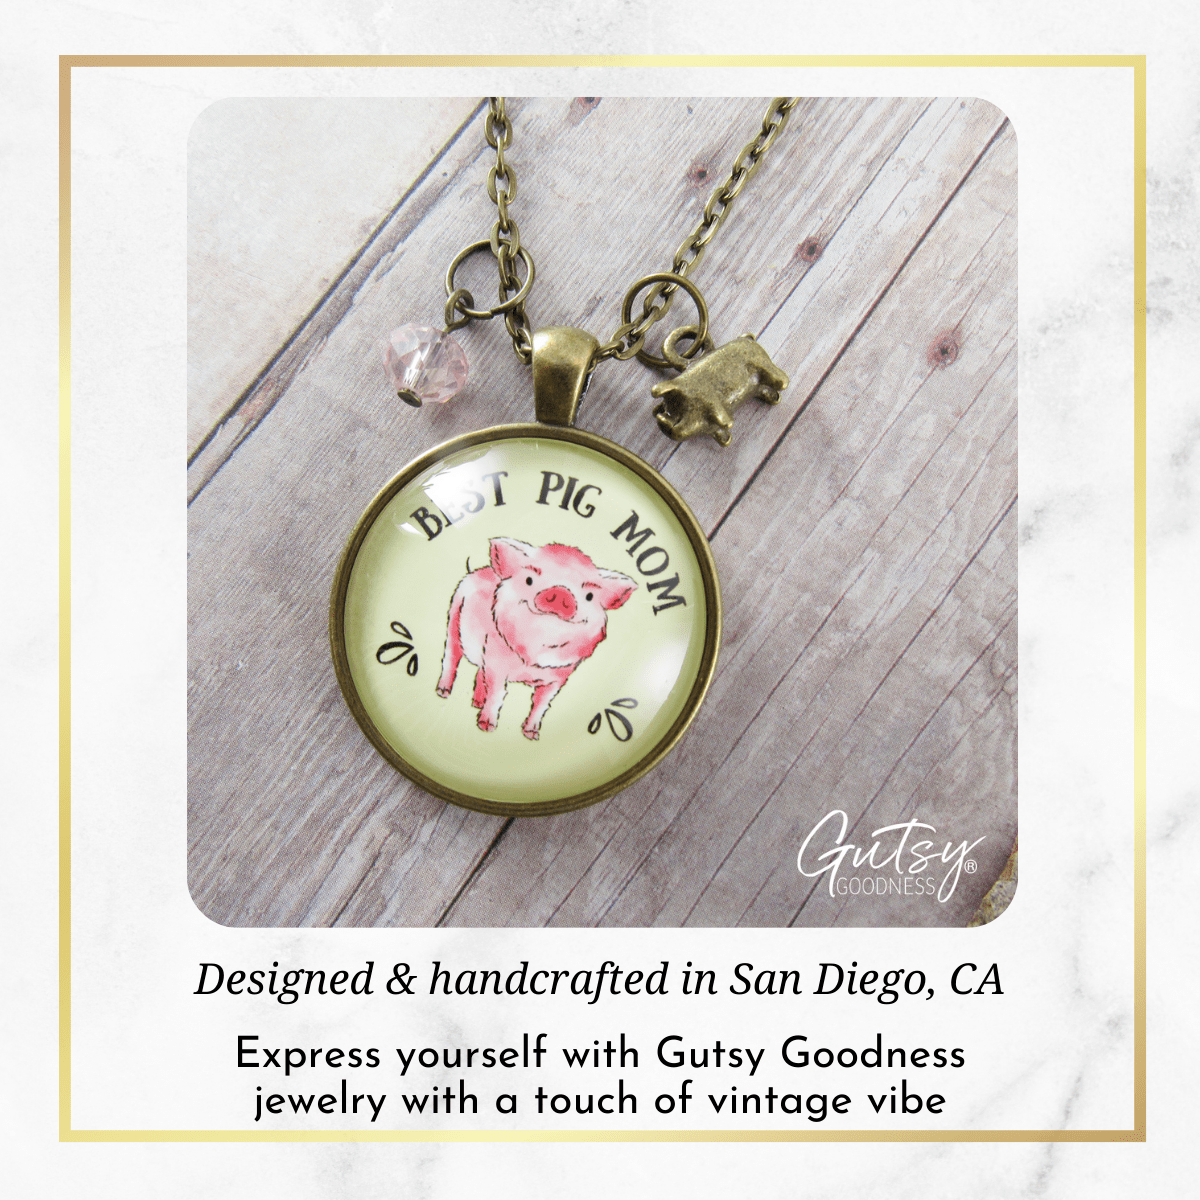 Gutsy Goodness Pig Mom Necklace Country Inspired Womens Pig Lover Gift Jewelry - Gutsy Goodness;Pig Mom Necklace Country Inspired Womens Pig Lover Gift Jewelry - Gutsy Goodness Handmade Jewelry Gifts